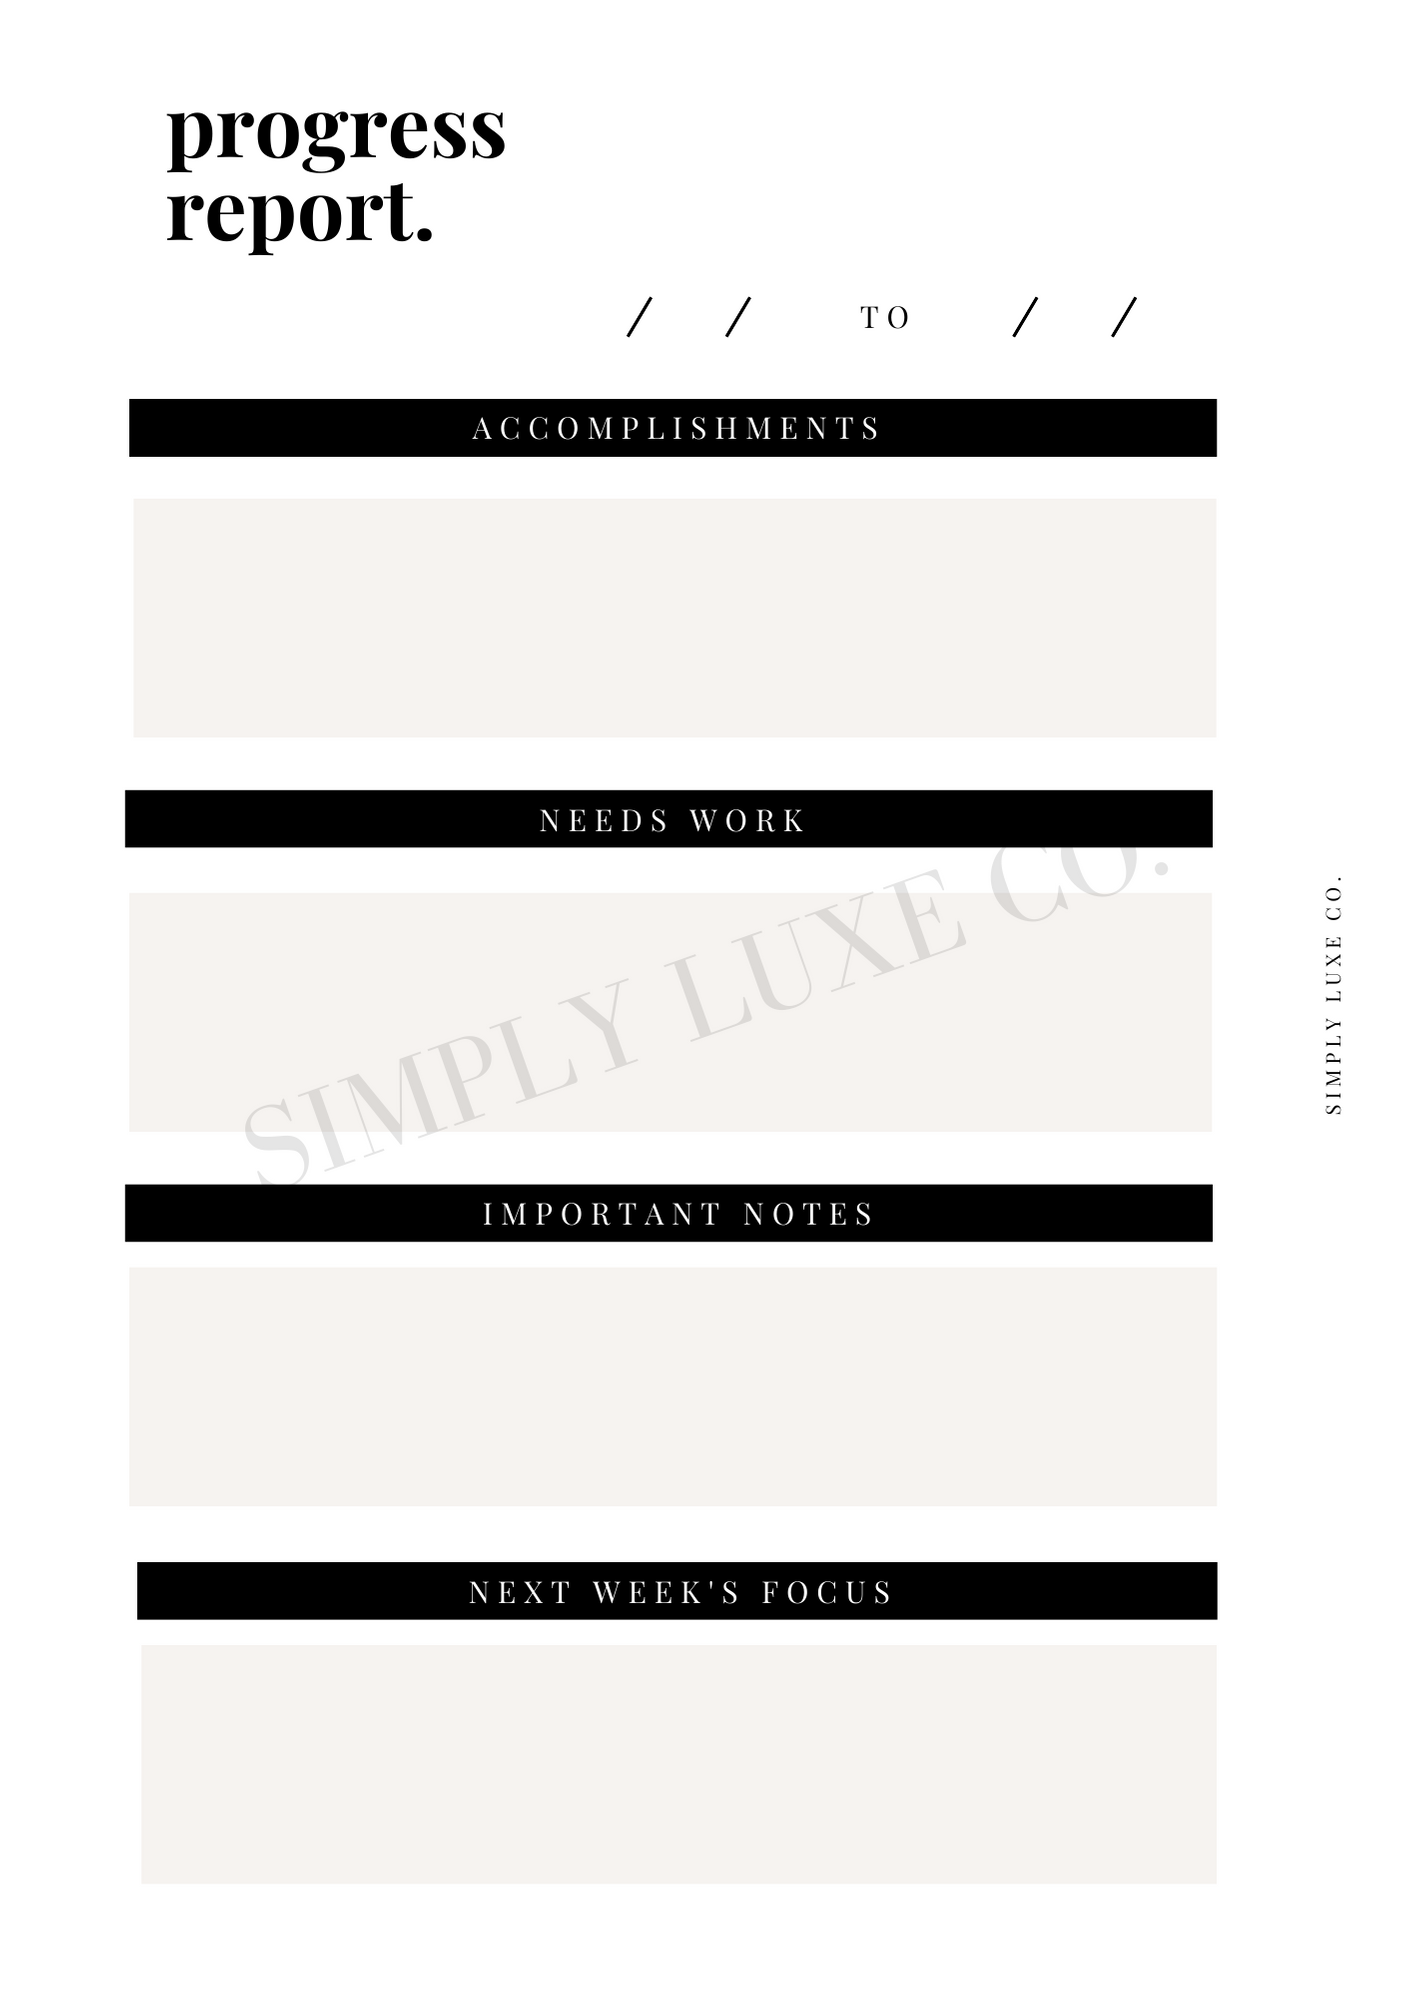 Progress Report Printable Inserts - Available in 2 colors